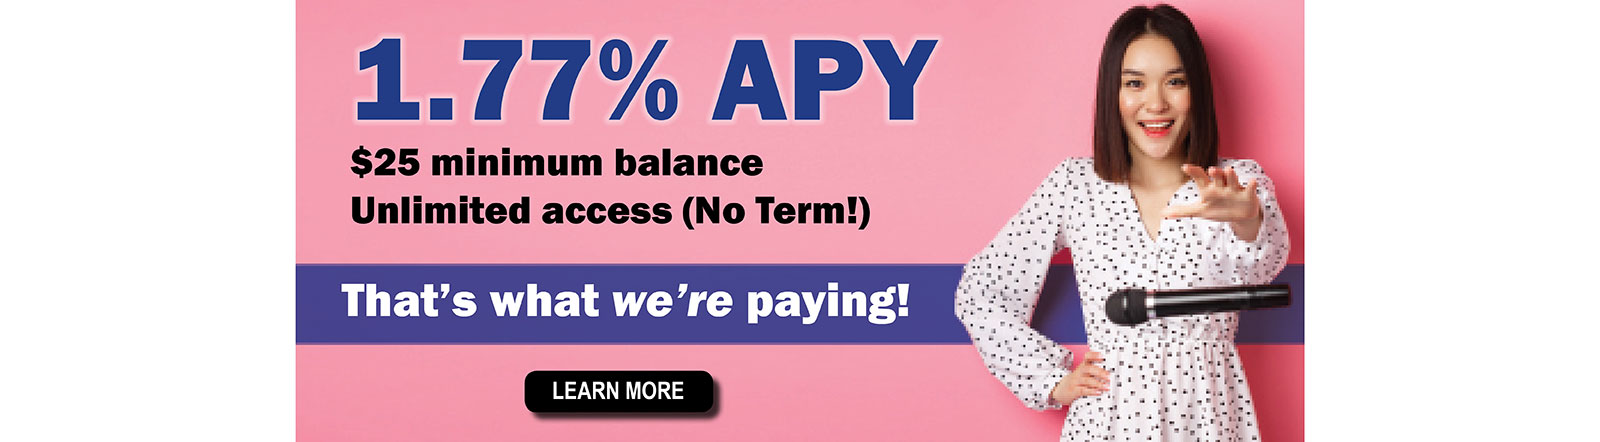 1.77% APY. $25 minimum balance. Unlimited access (no term!) That's what we're paying!